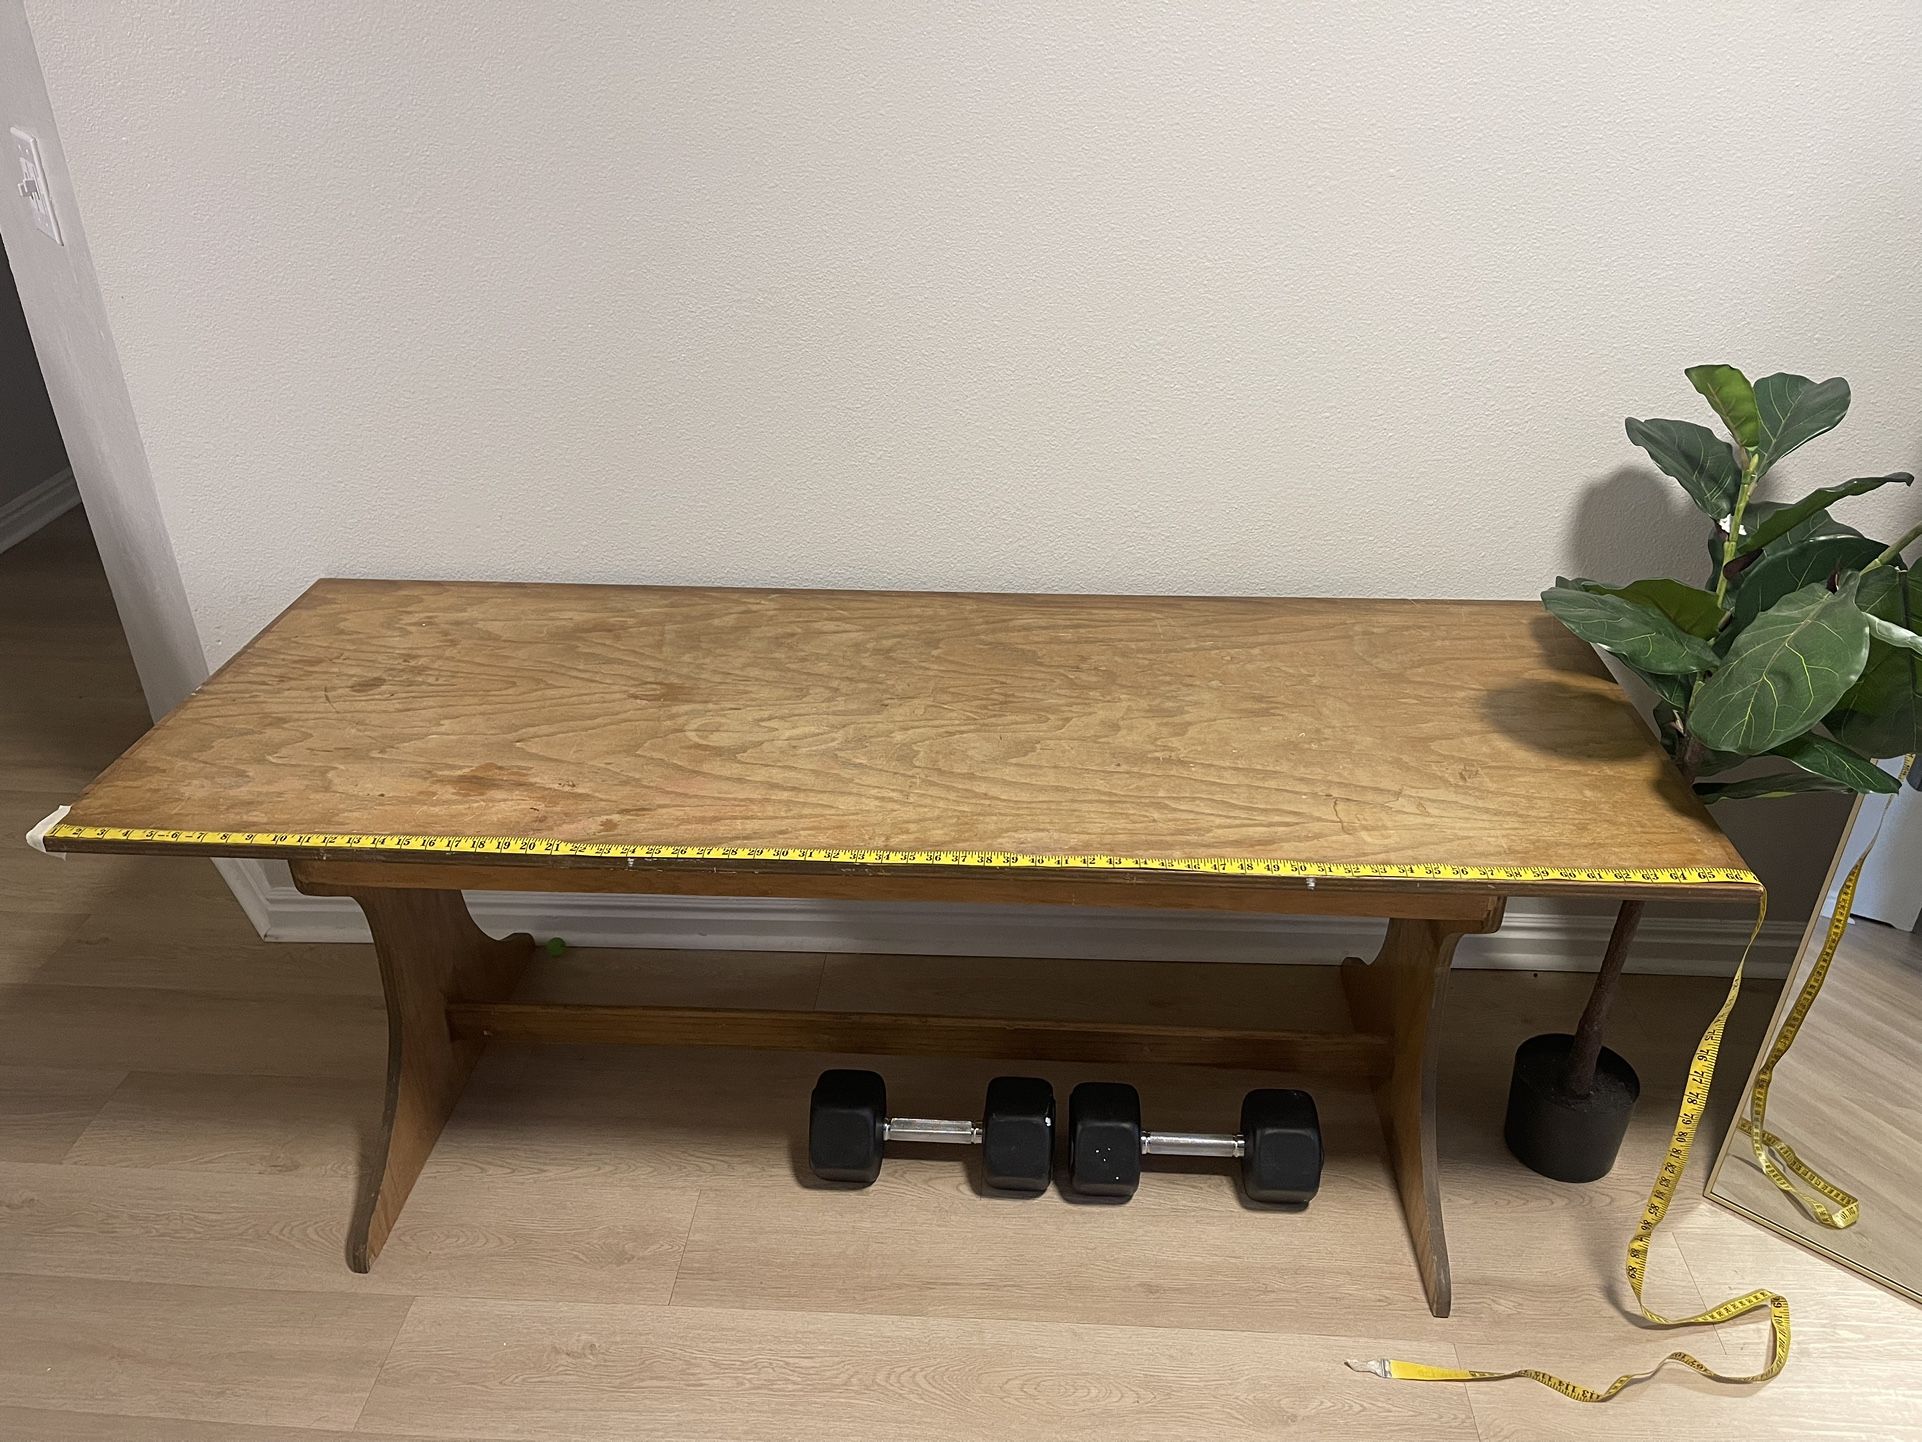 Craft Table With Storage